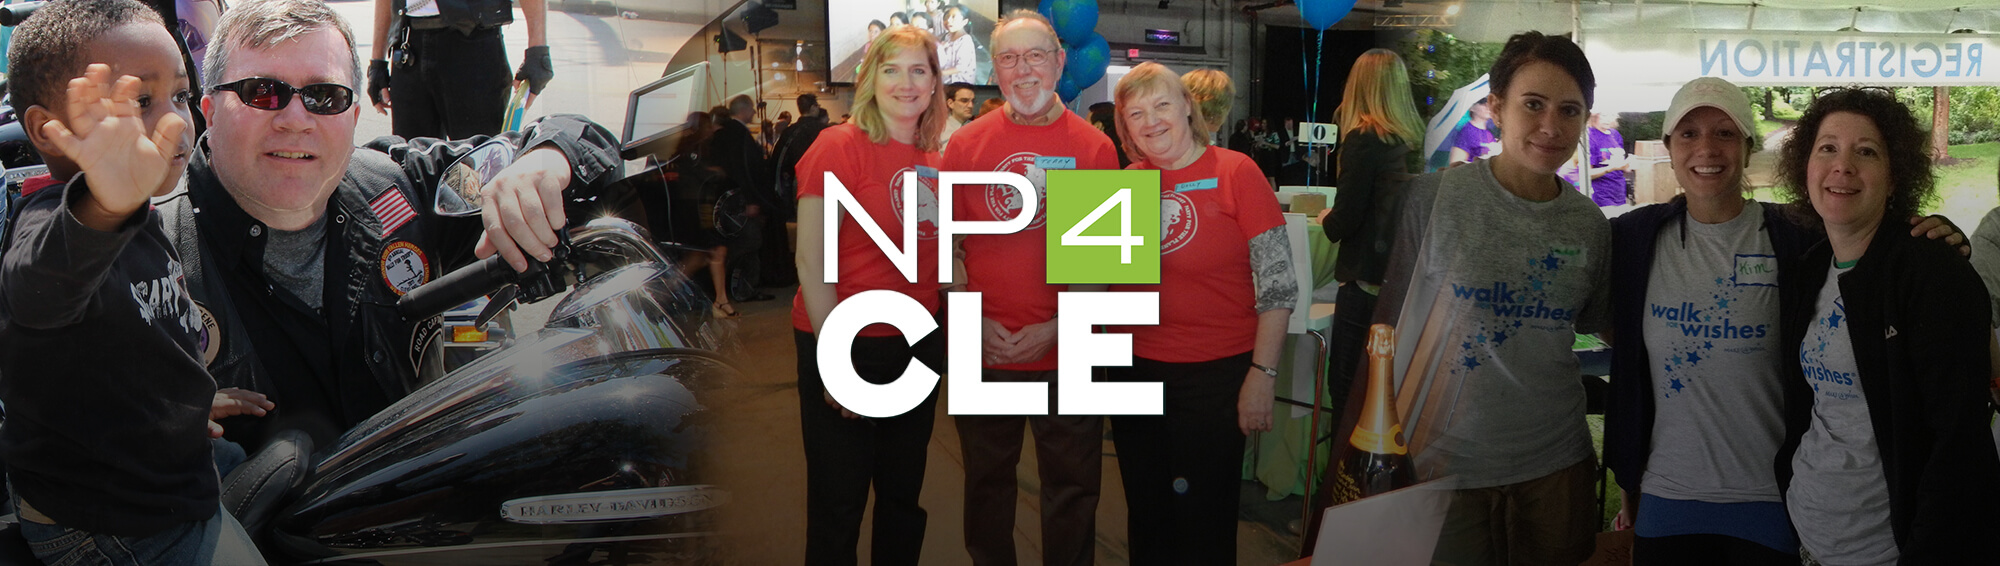 np4cle-charity-of-month mobile